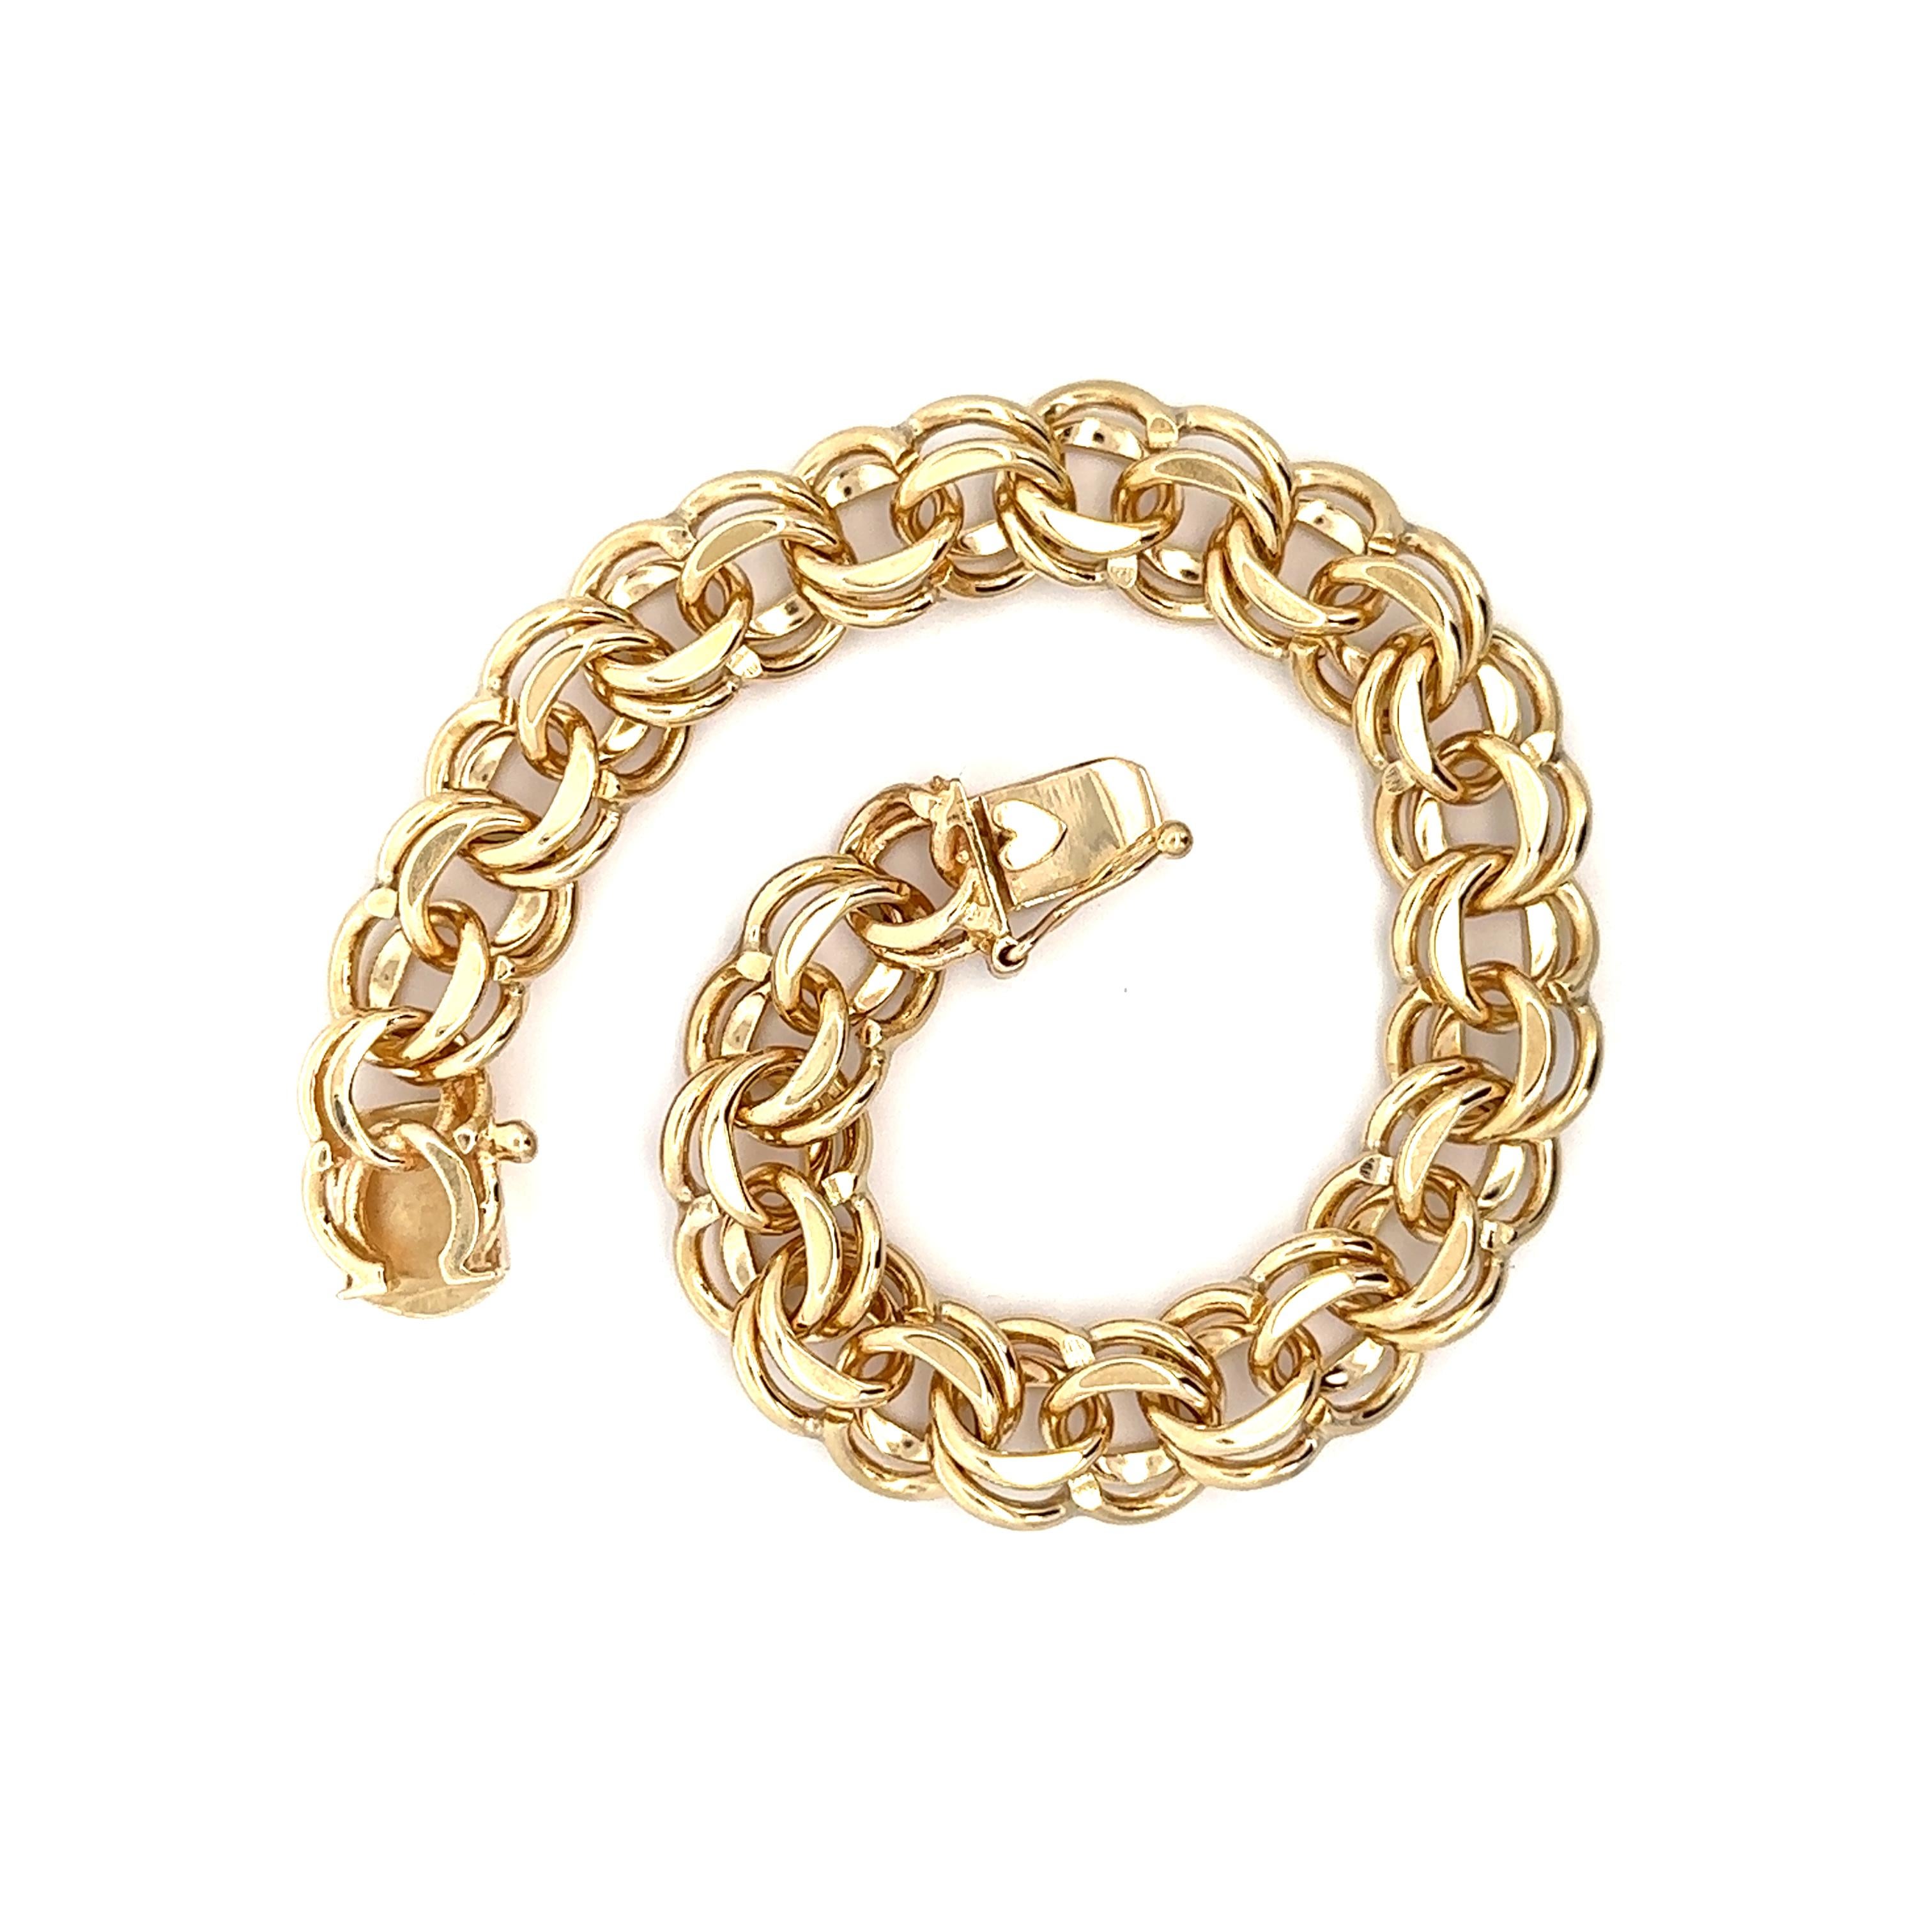 Material: Solid 14k Yellow Gold 
Weight: 44.01 Grams
Chain Type: Dual Plain Curb Link
Chain Length:	Will fit a 7.5 Inch wrist (fitted on a wrist)
Clasp: Box Clasp w/ Safety Latch
Width: 11.7mm (0.46 in)
Thickness: 5.8mm (rise off the